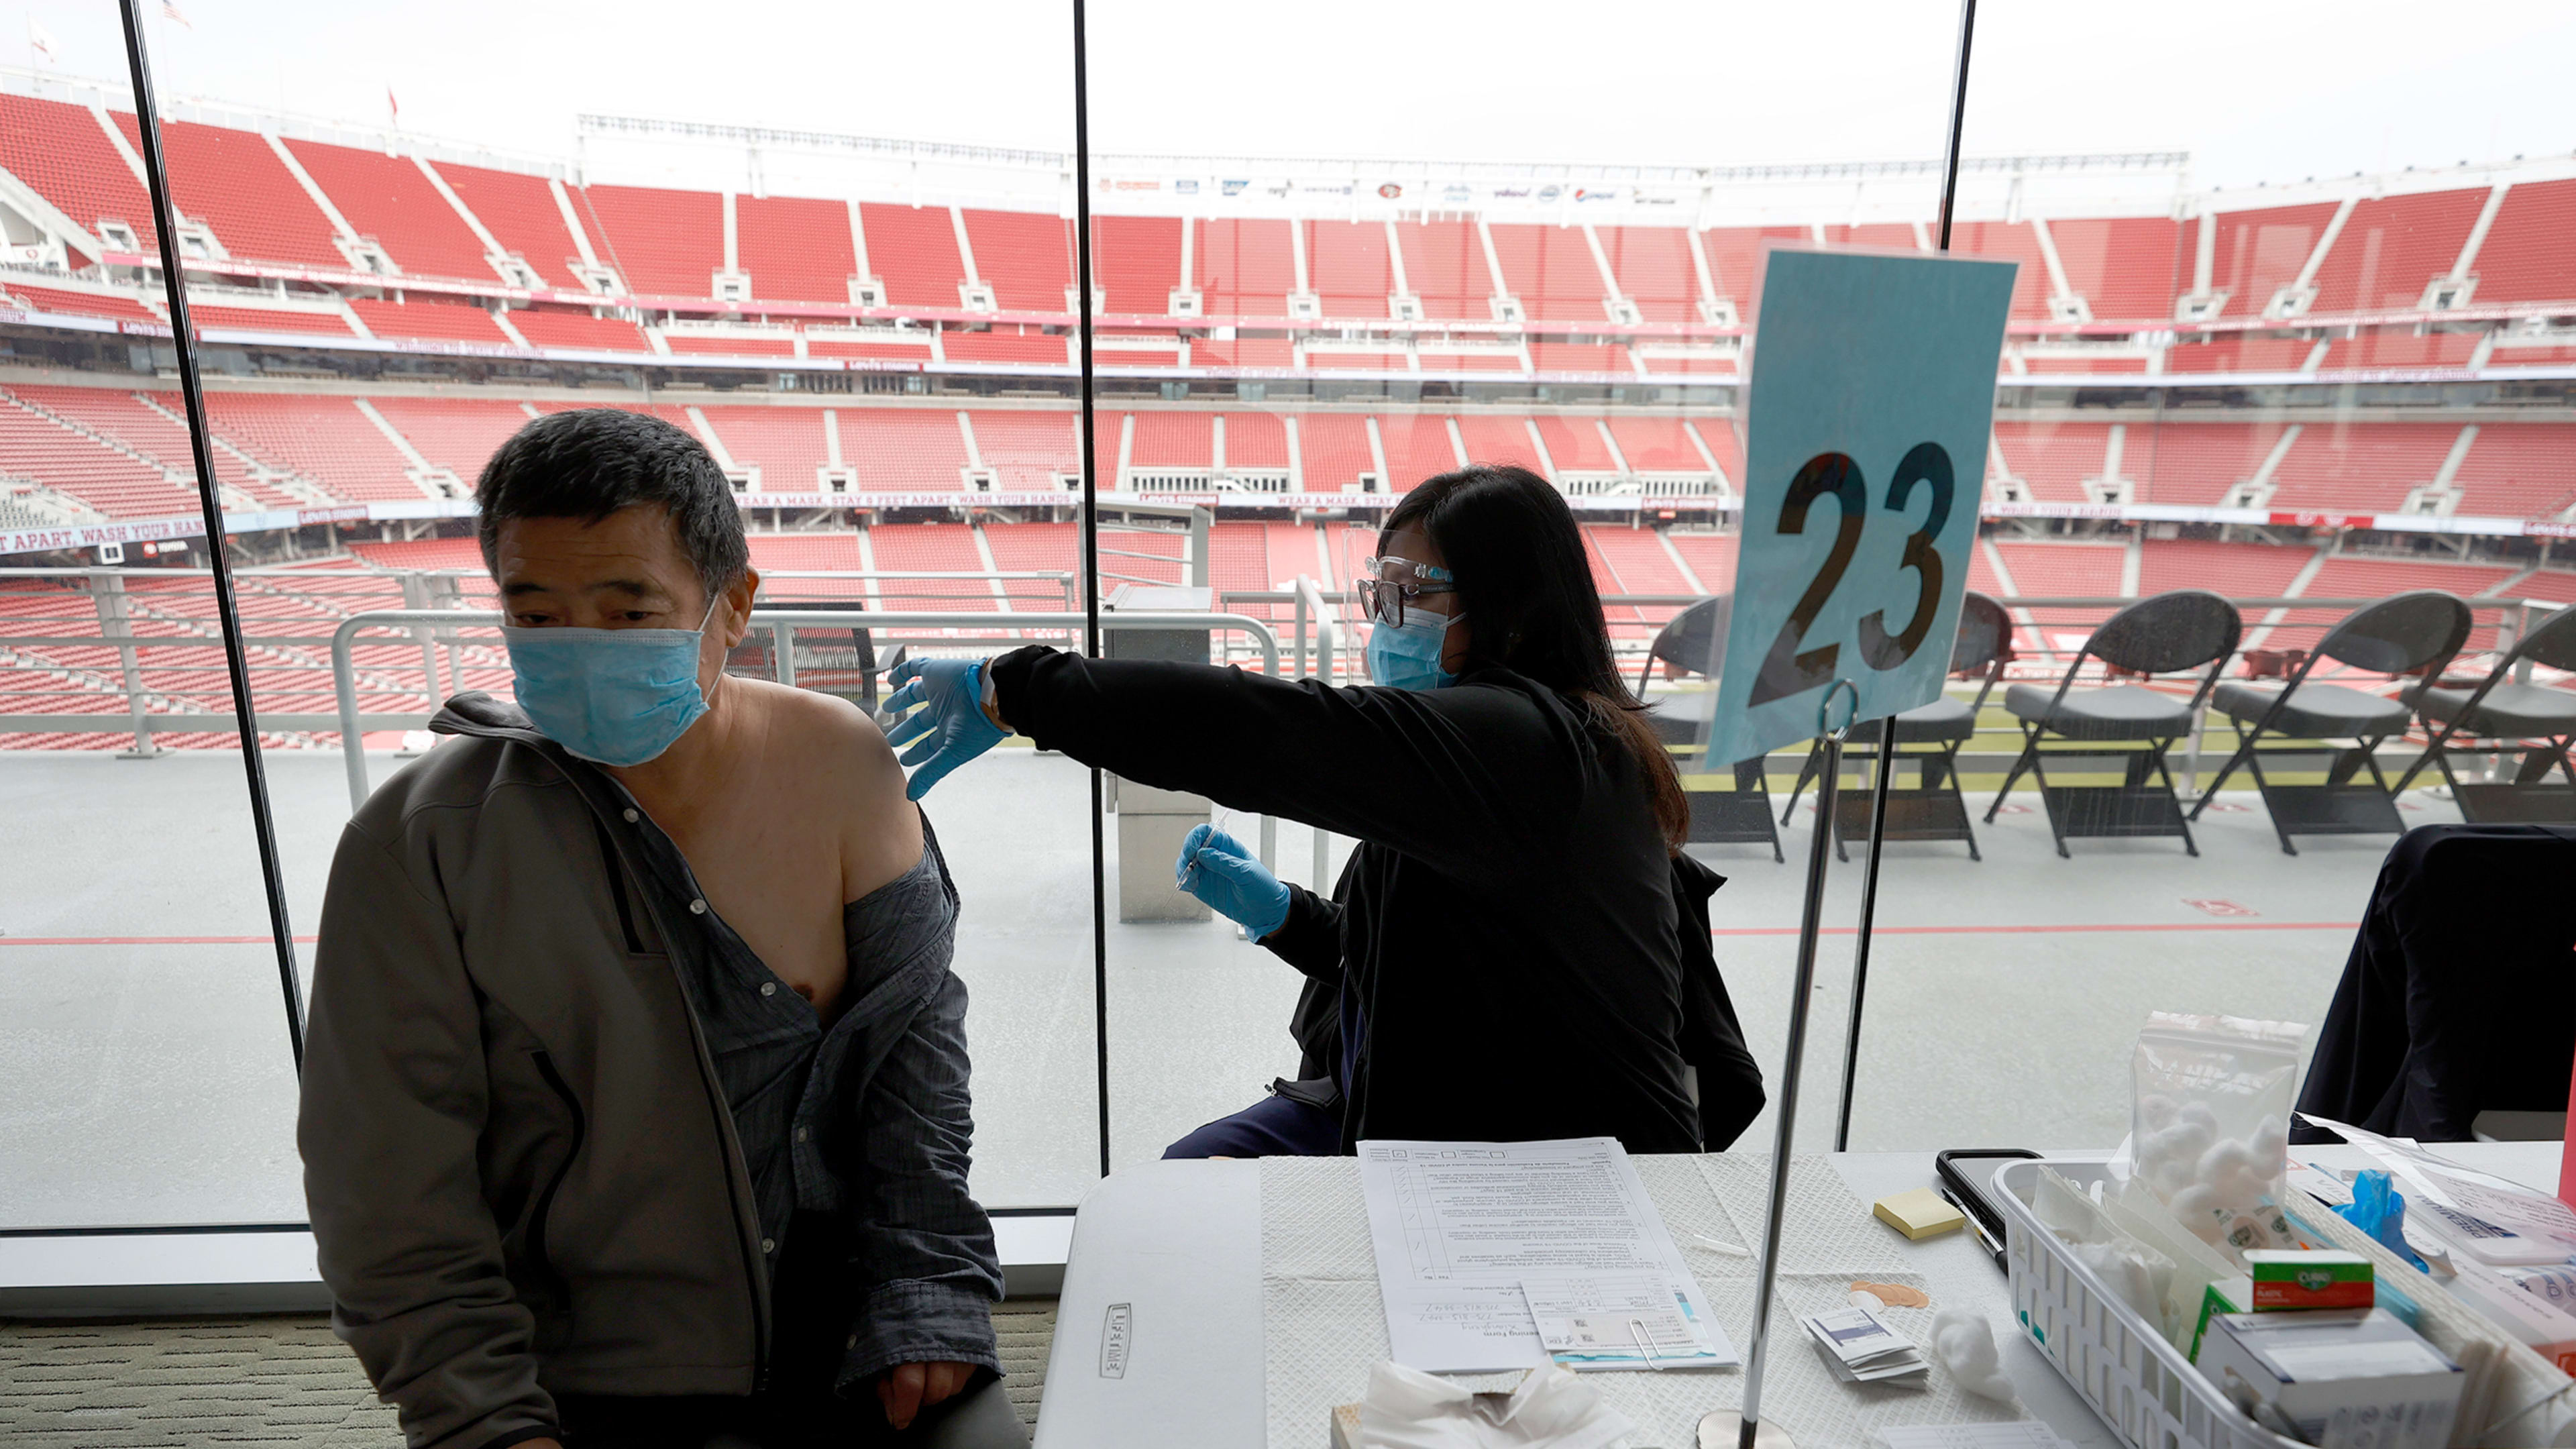 The unsung heroes of the pandemic? Sports stadiums